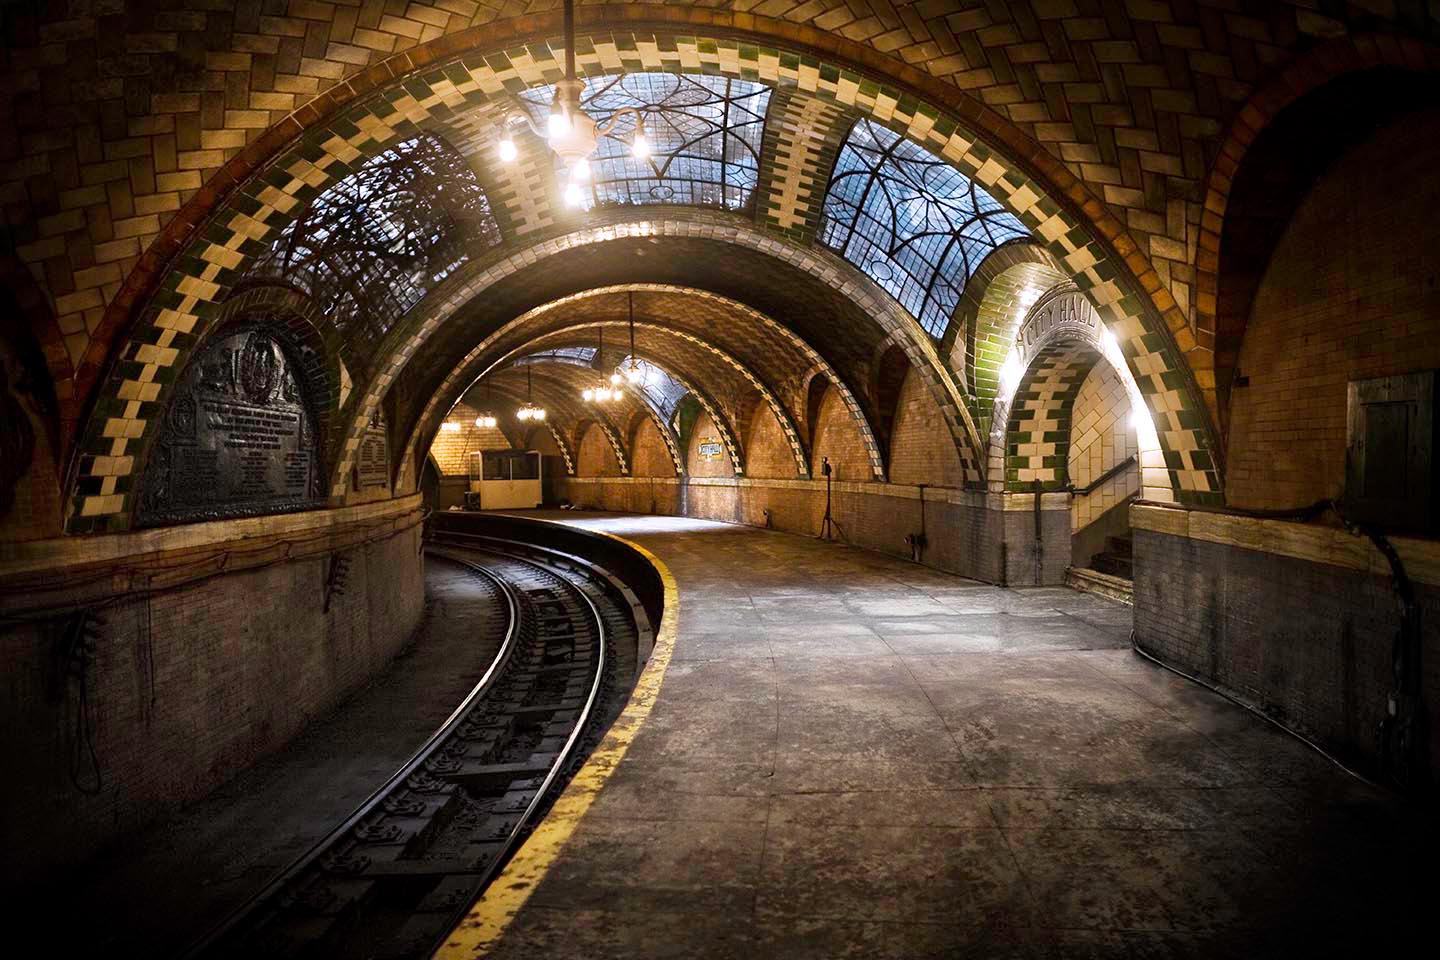 This NYC subway station used to service thousands of commuters each day. It is located near City Hall, and can still be seen by the Number Six train as it passes through the now defunct station.